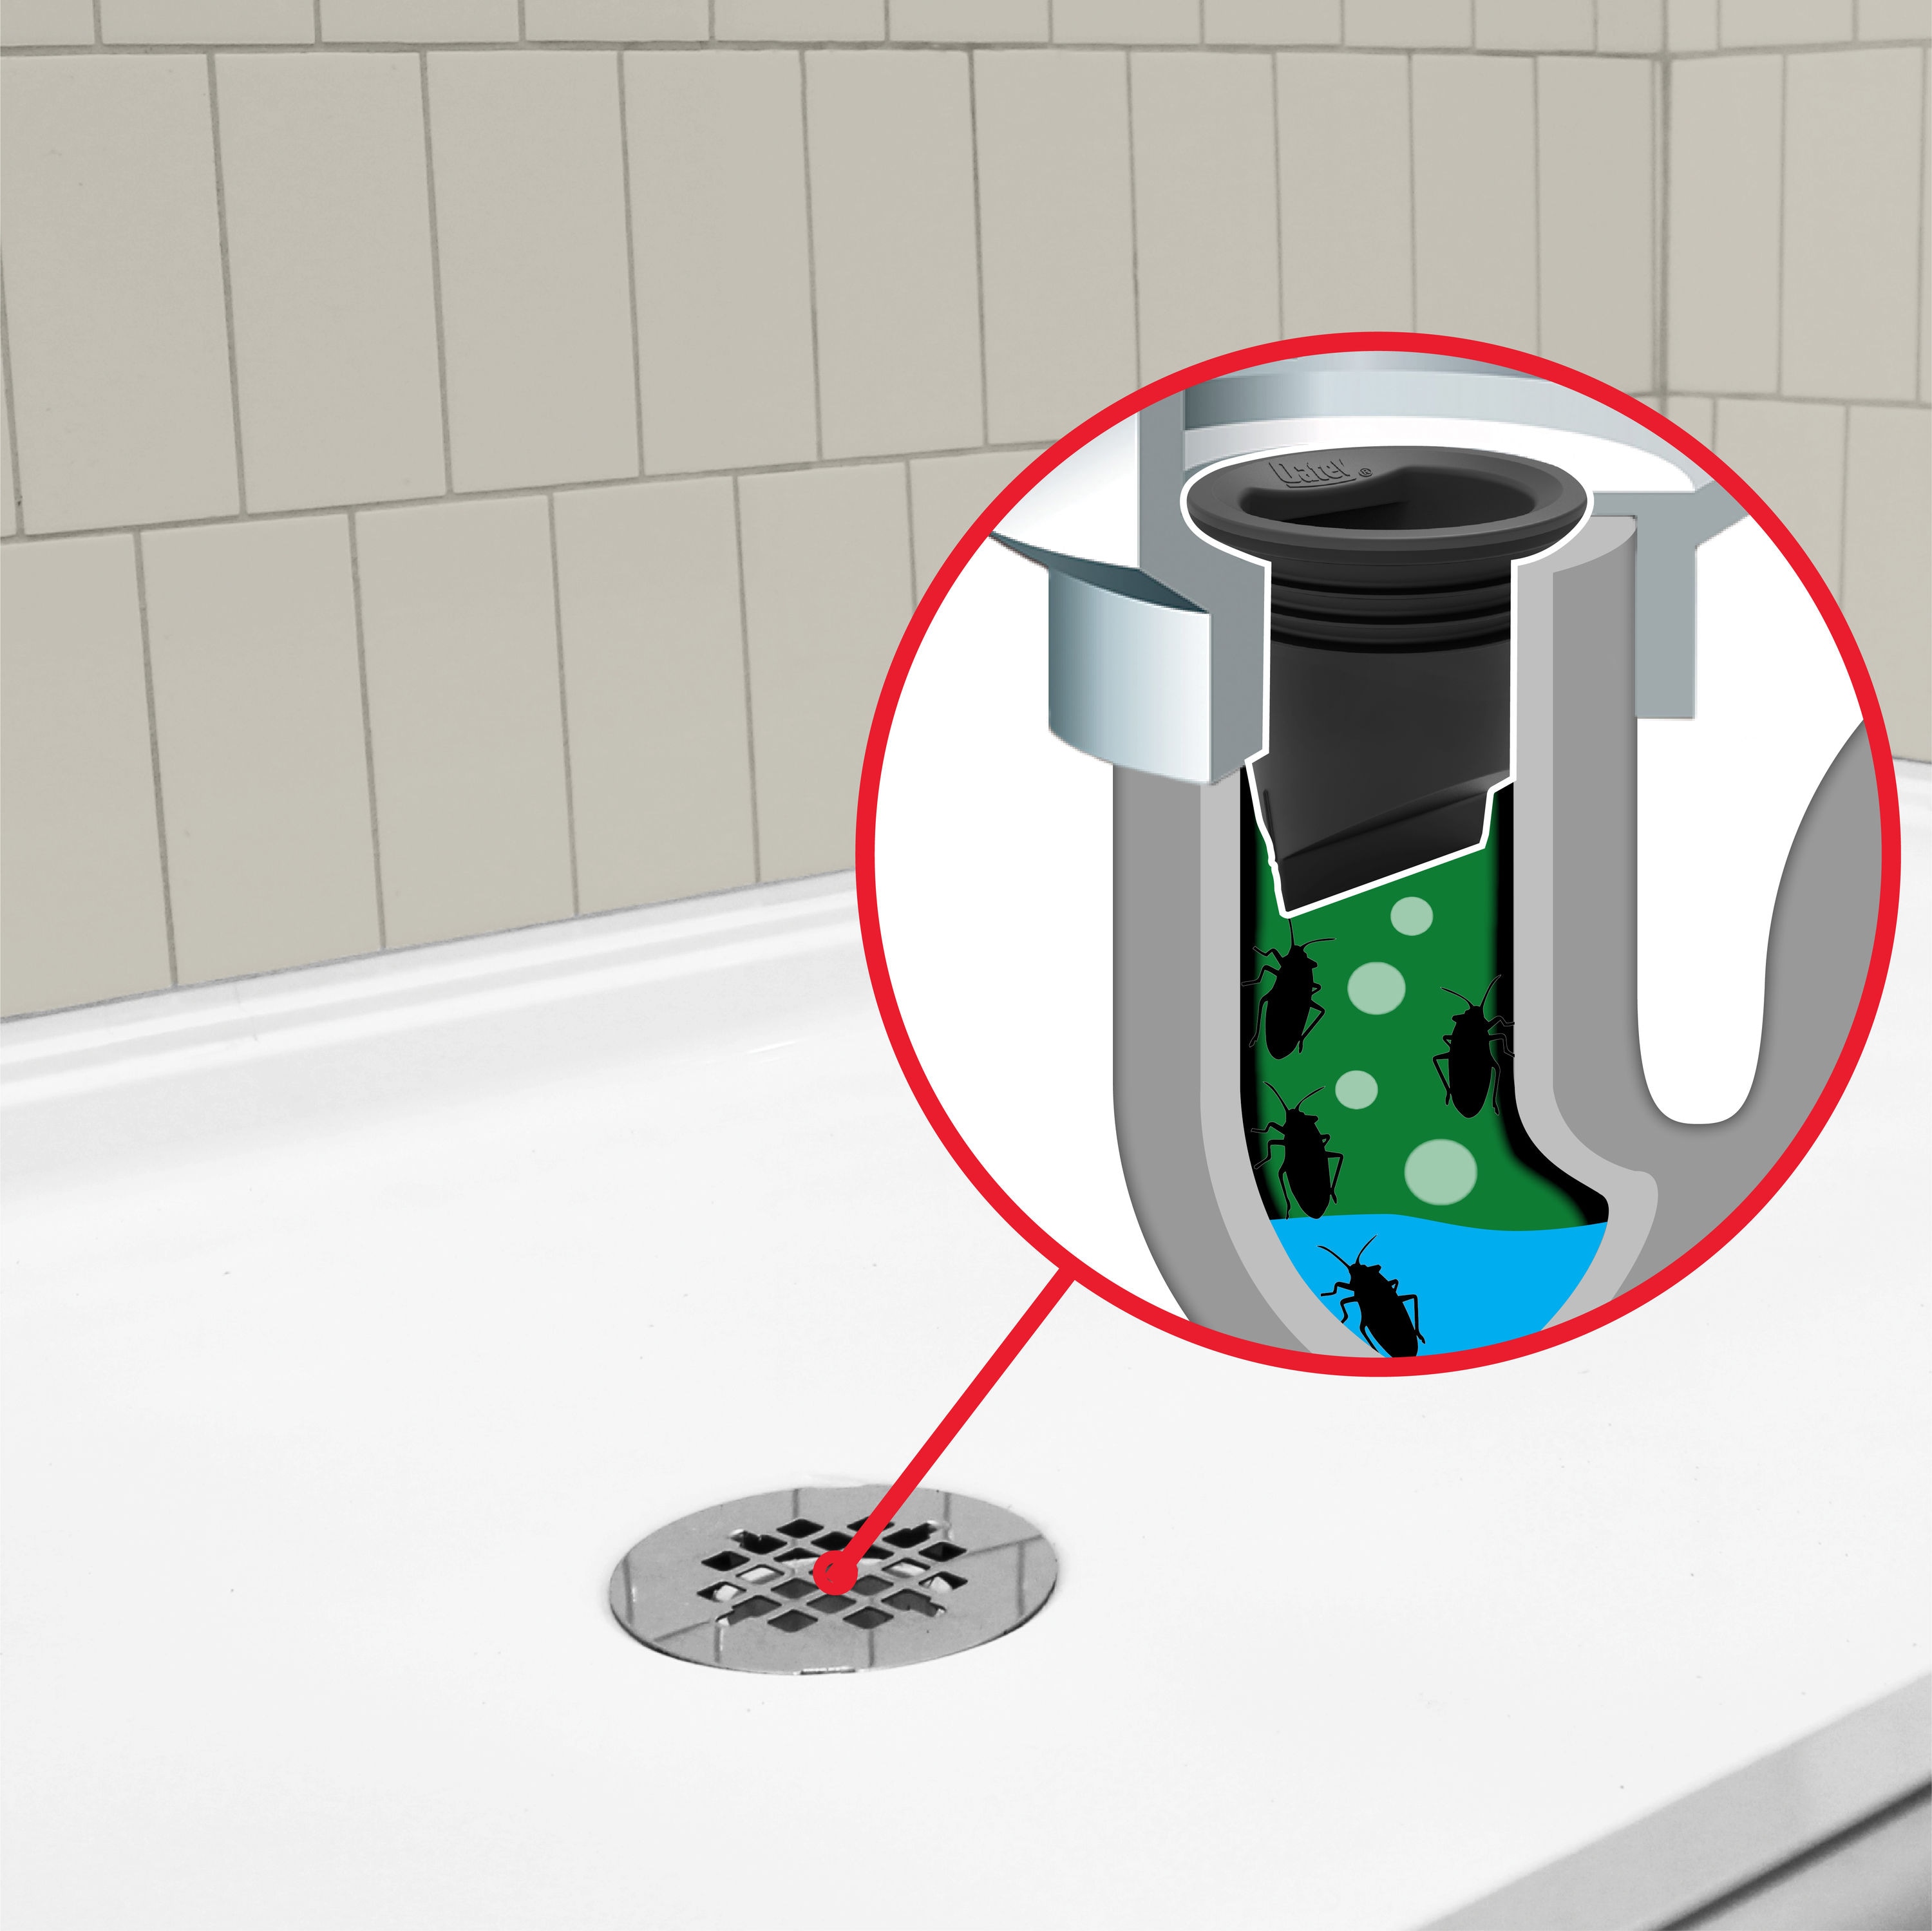 4 Ways to Keep Hair Out of Shower Drain - Priority Plumbing